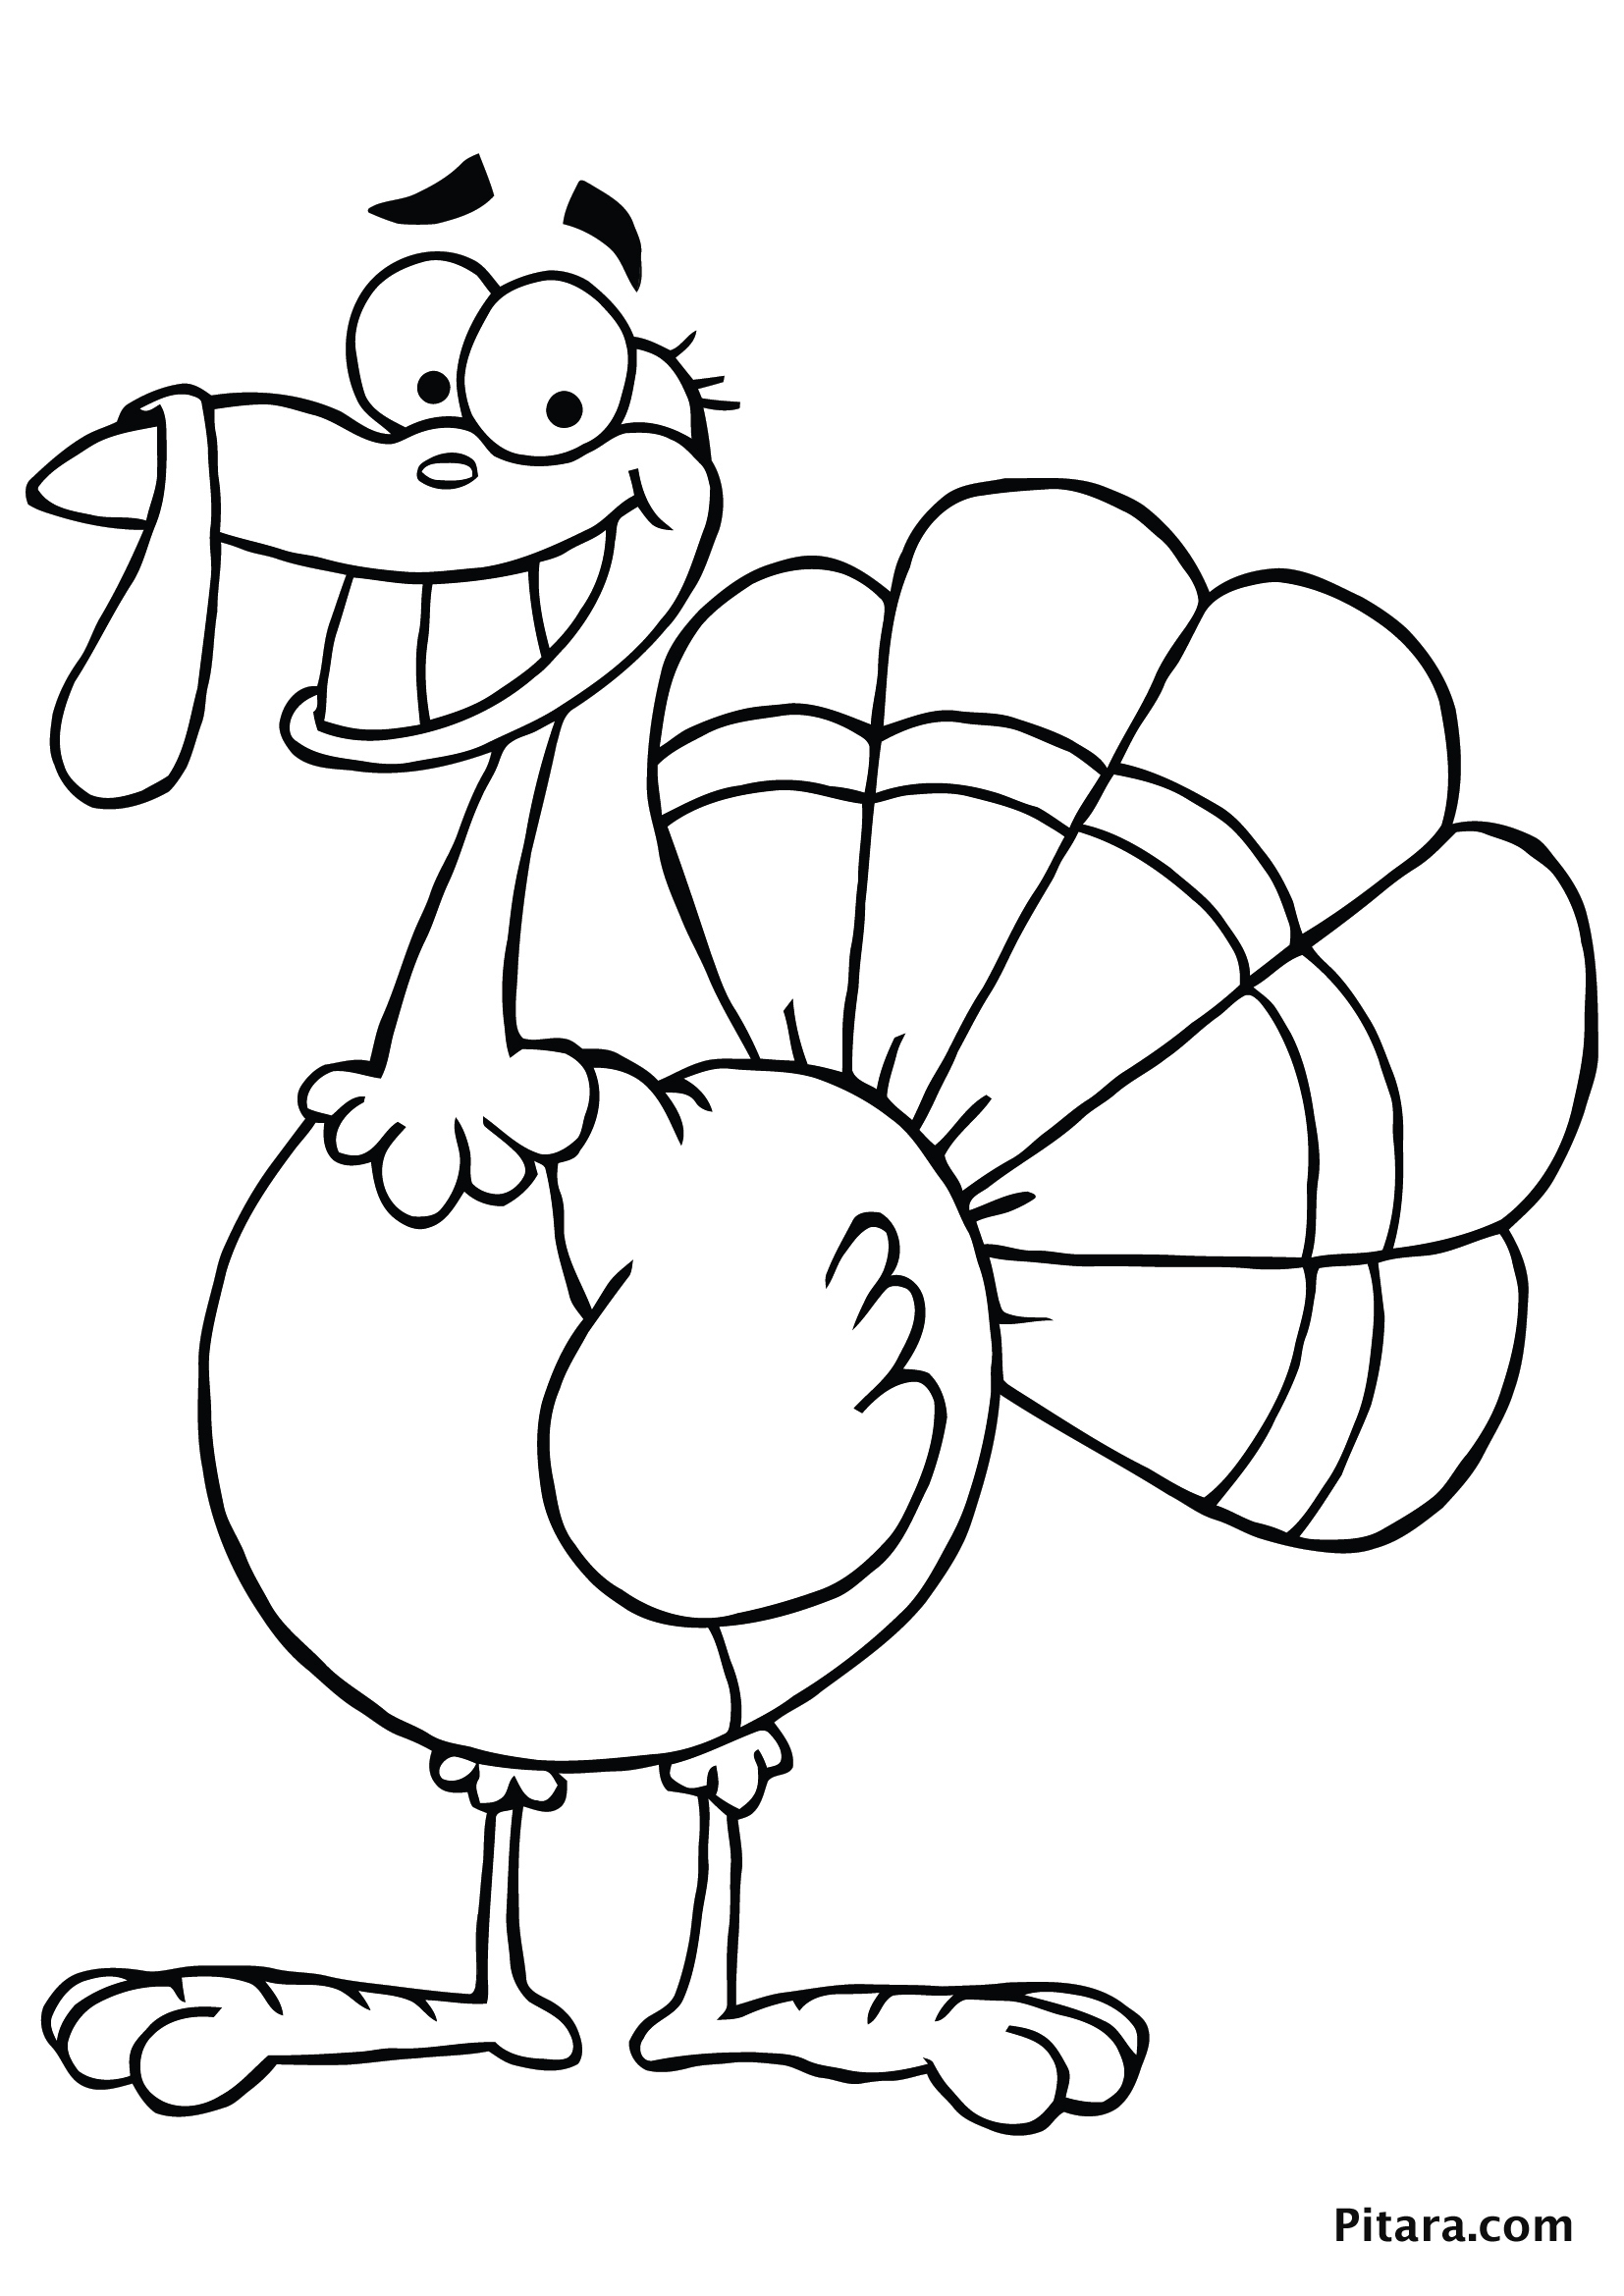 Free Coloring Pages Of Turkeys For Kids 4